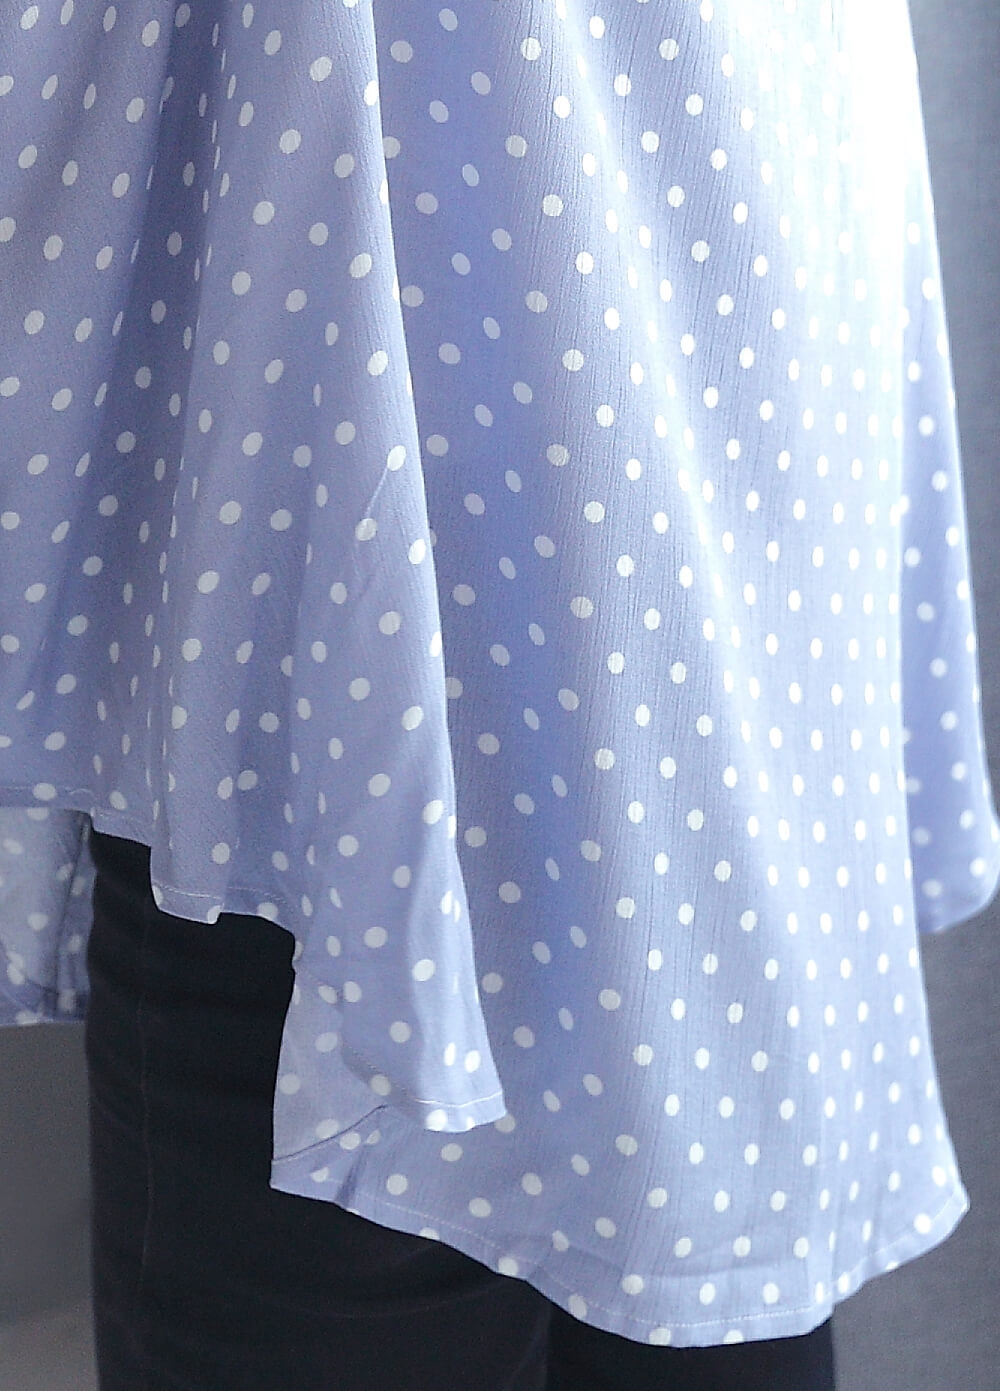 Lait & Co - Nursing Couverture in Blue Polkadot | Queen Bee